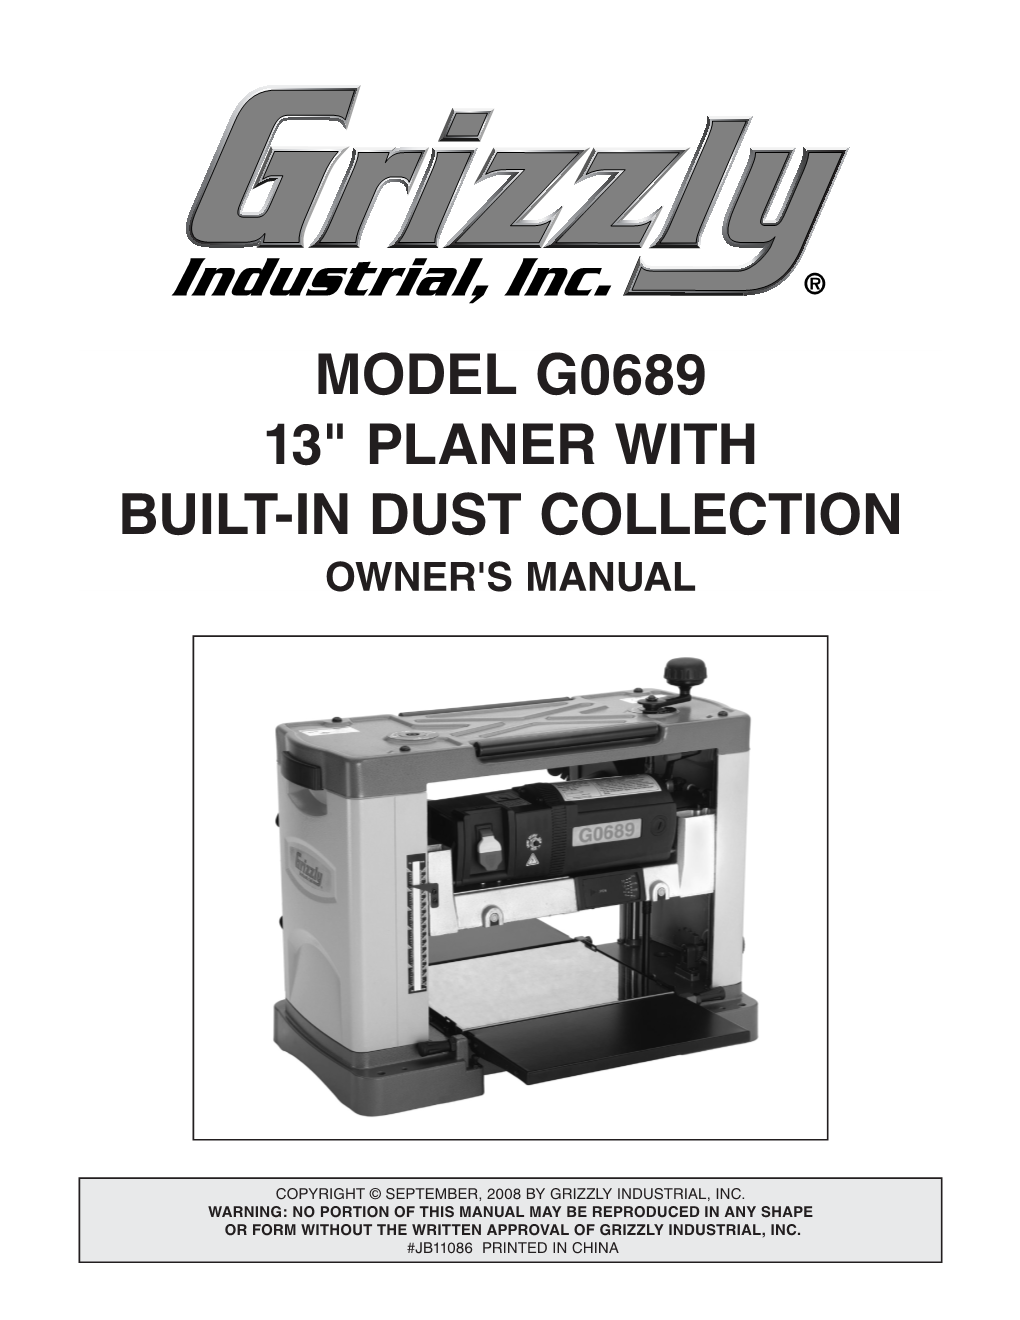 MODEL G0689 13" PLANER with BUILT-IN DUST COLLECTION OWNER's Manual